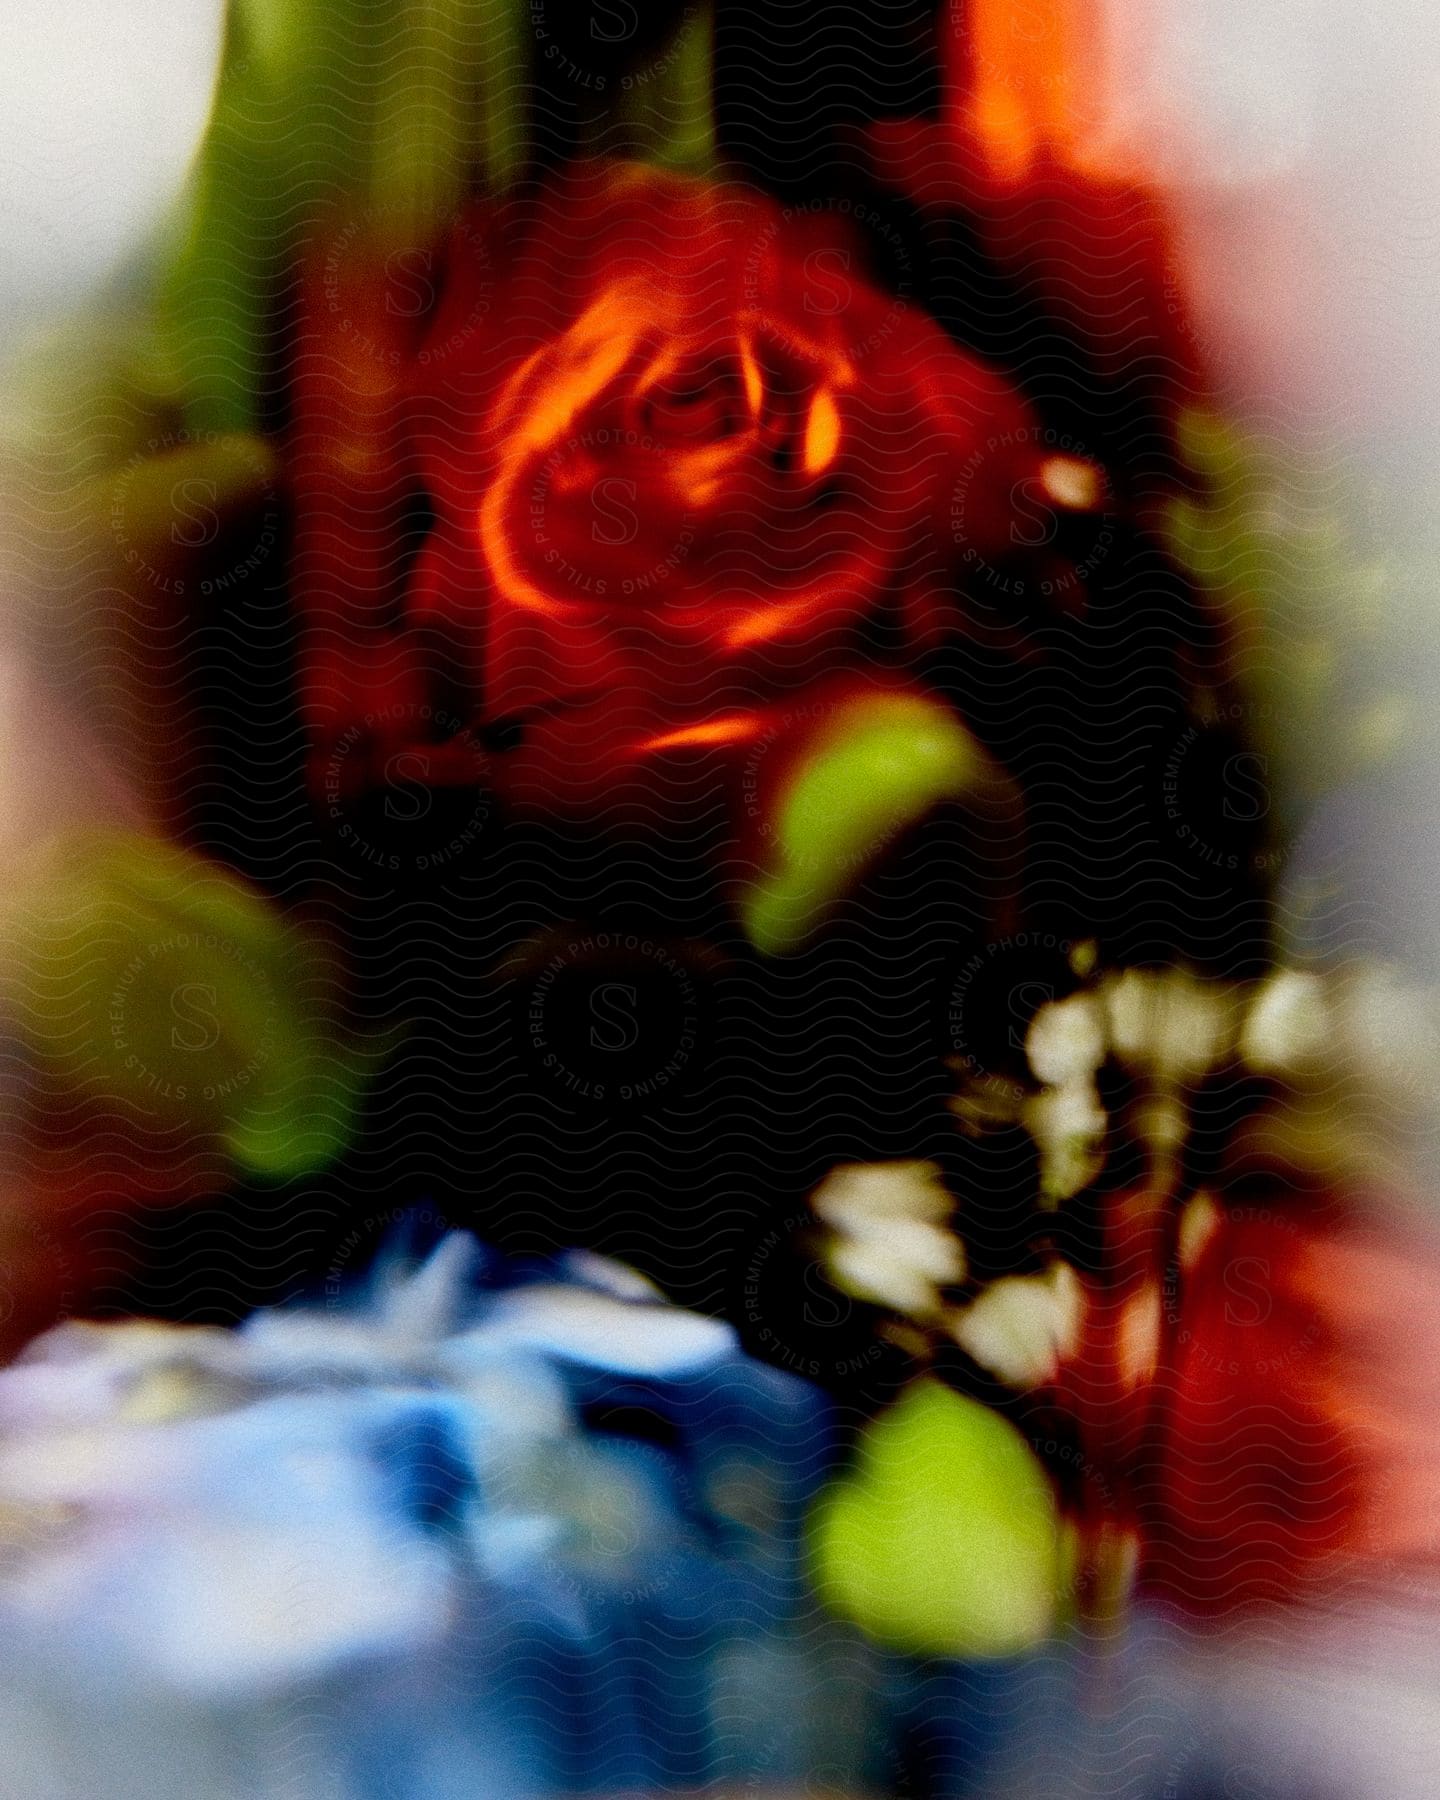 Several outoffocus flowers including a red rose are depicted in this image